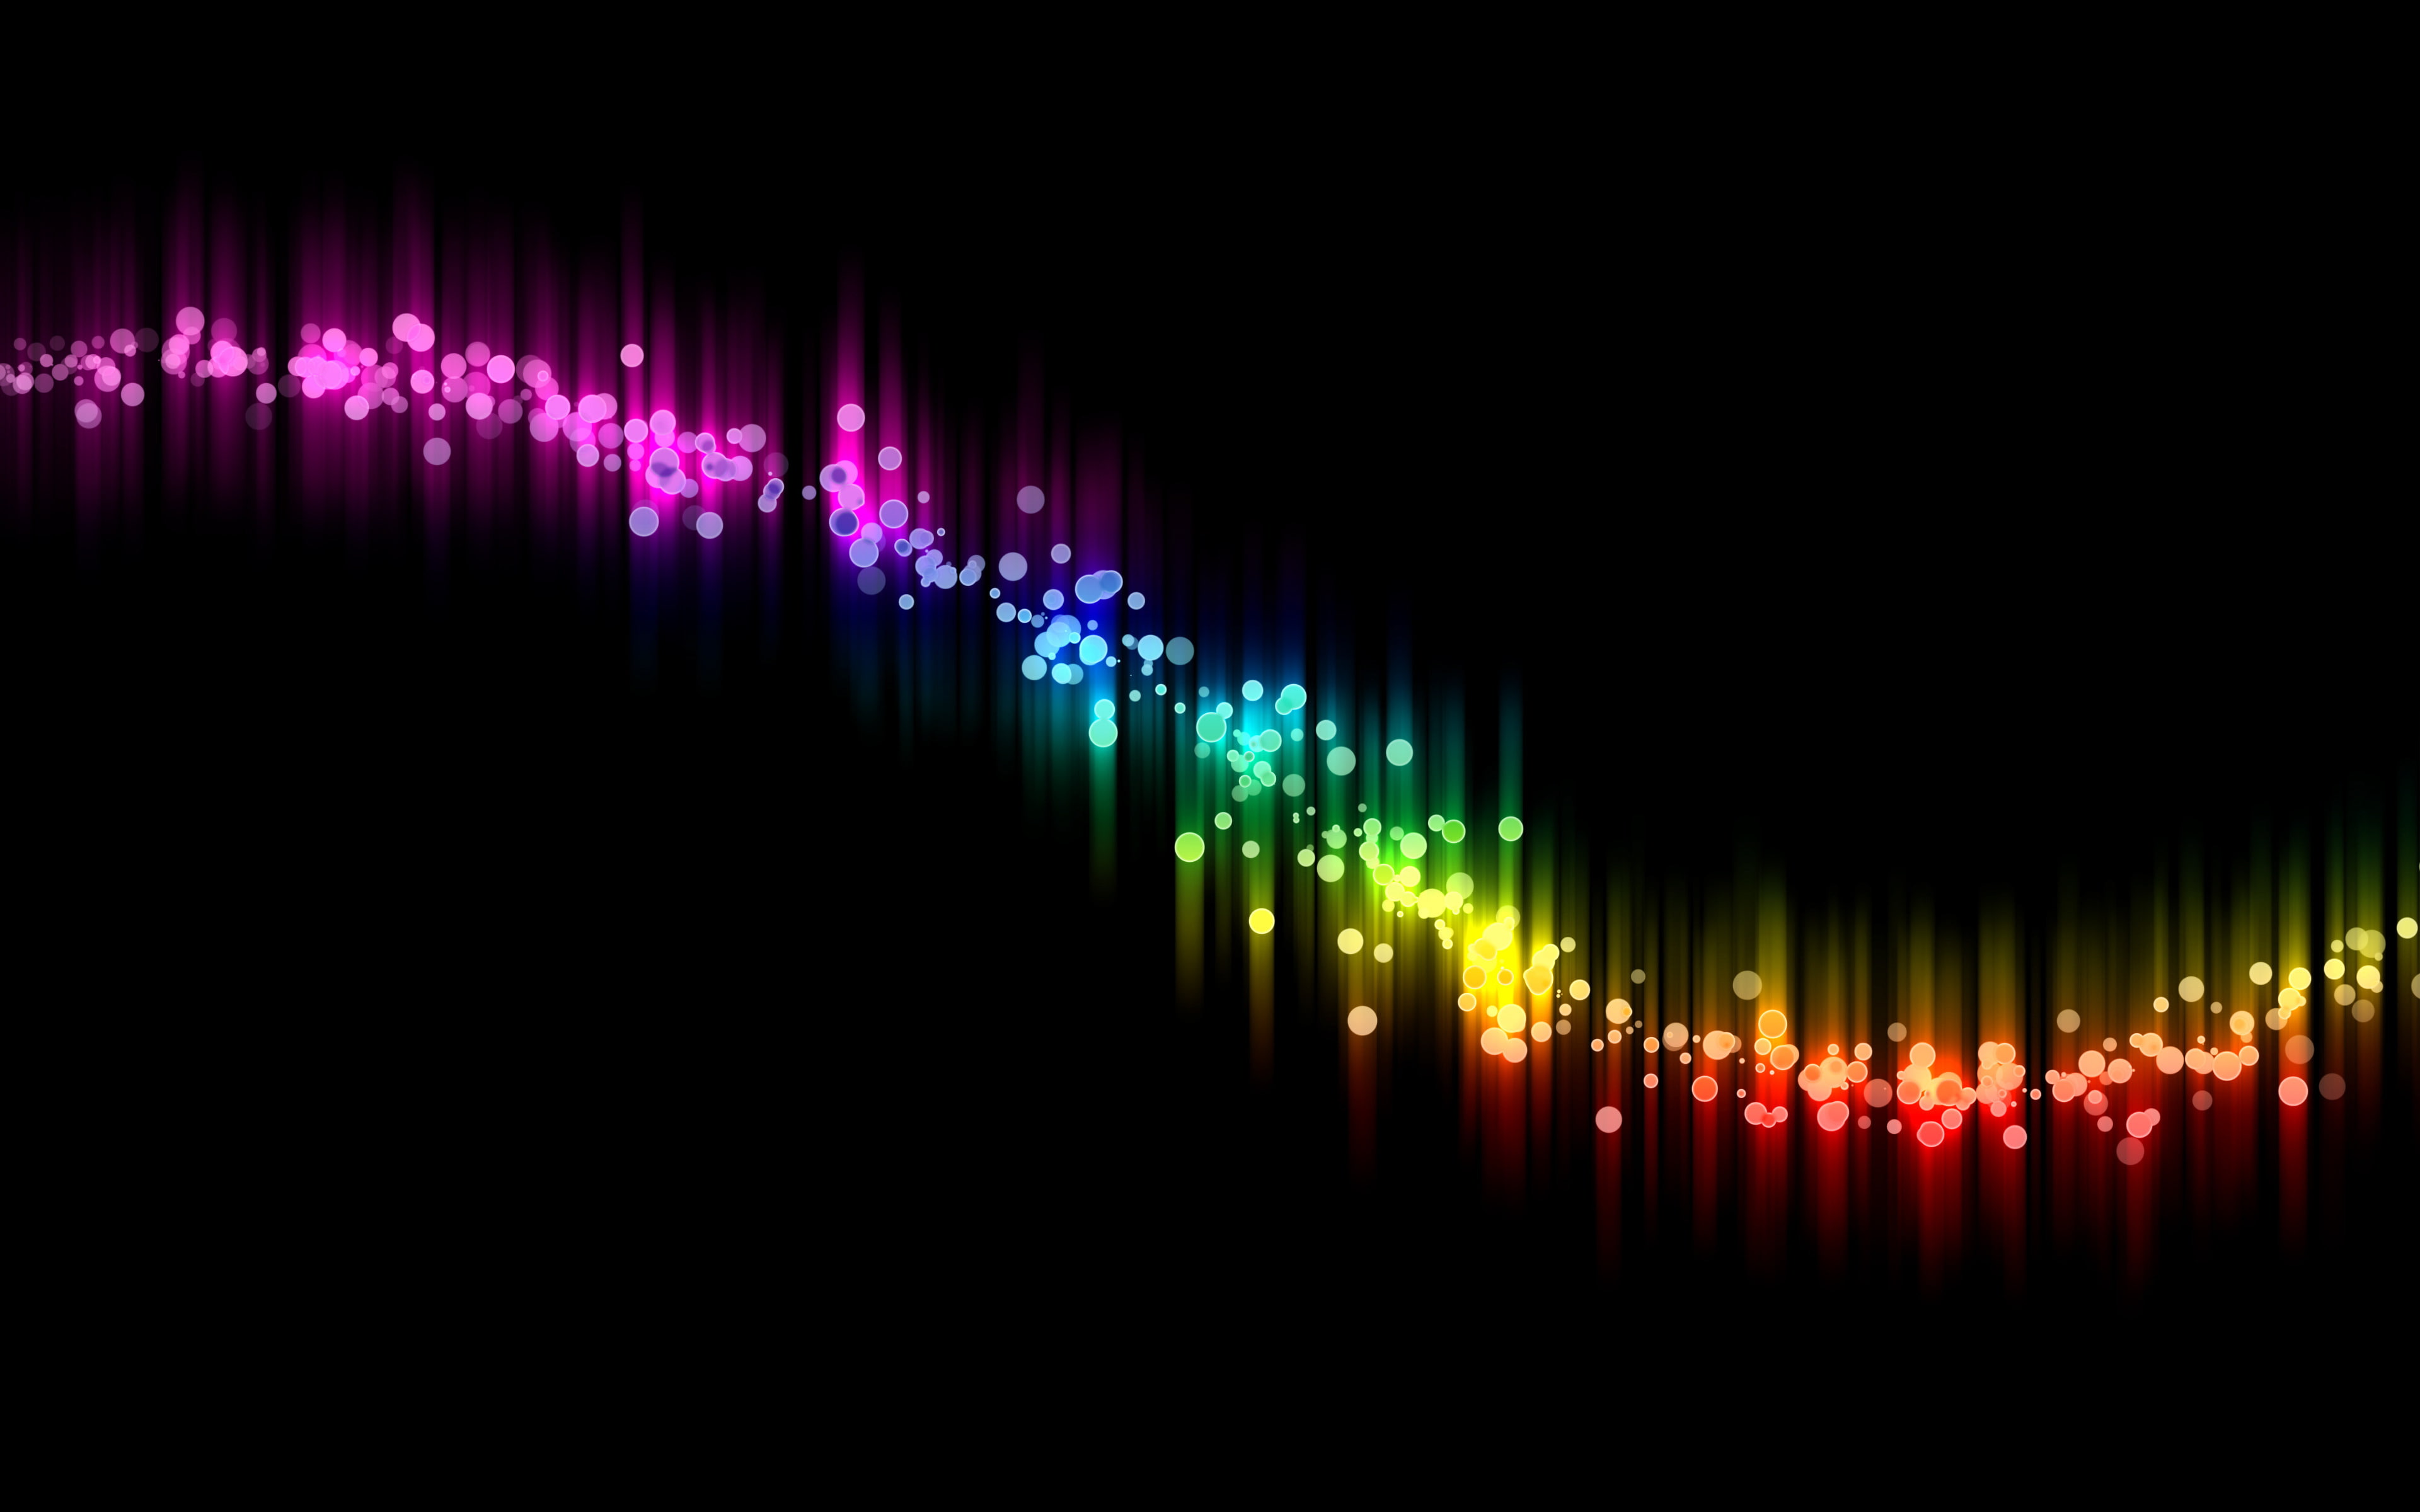 Spectrum, Color, Glow, Black Background, pink, blue and yellow lights illustraion